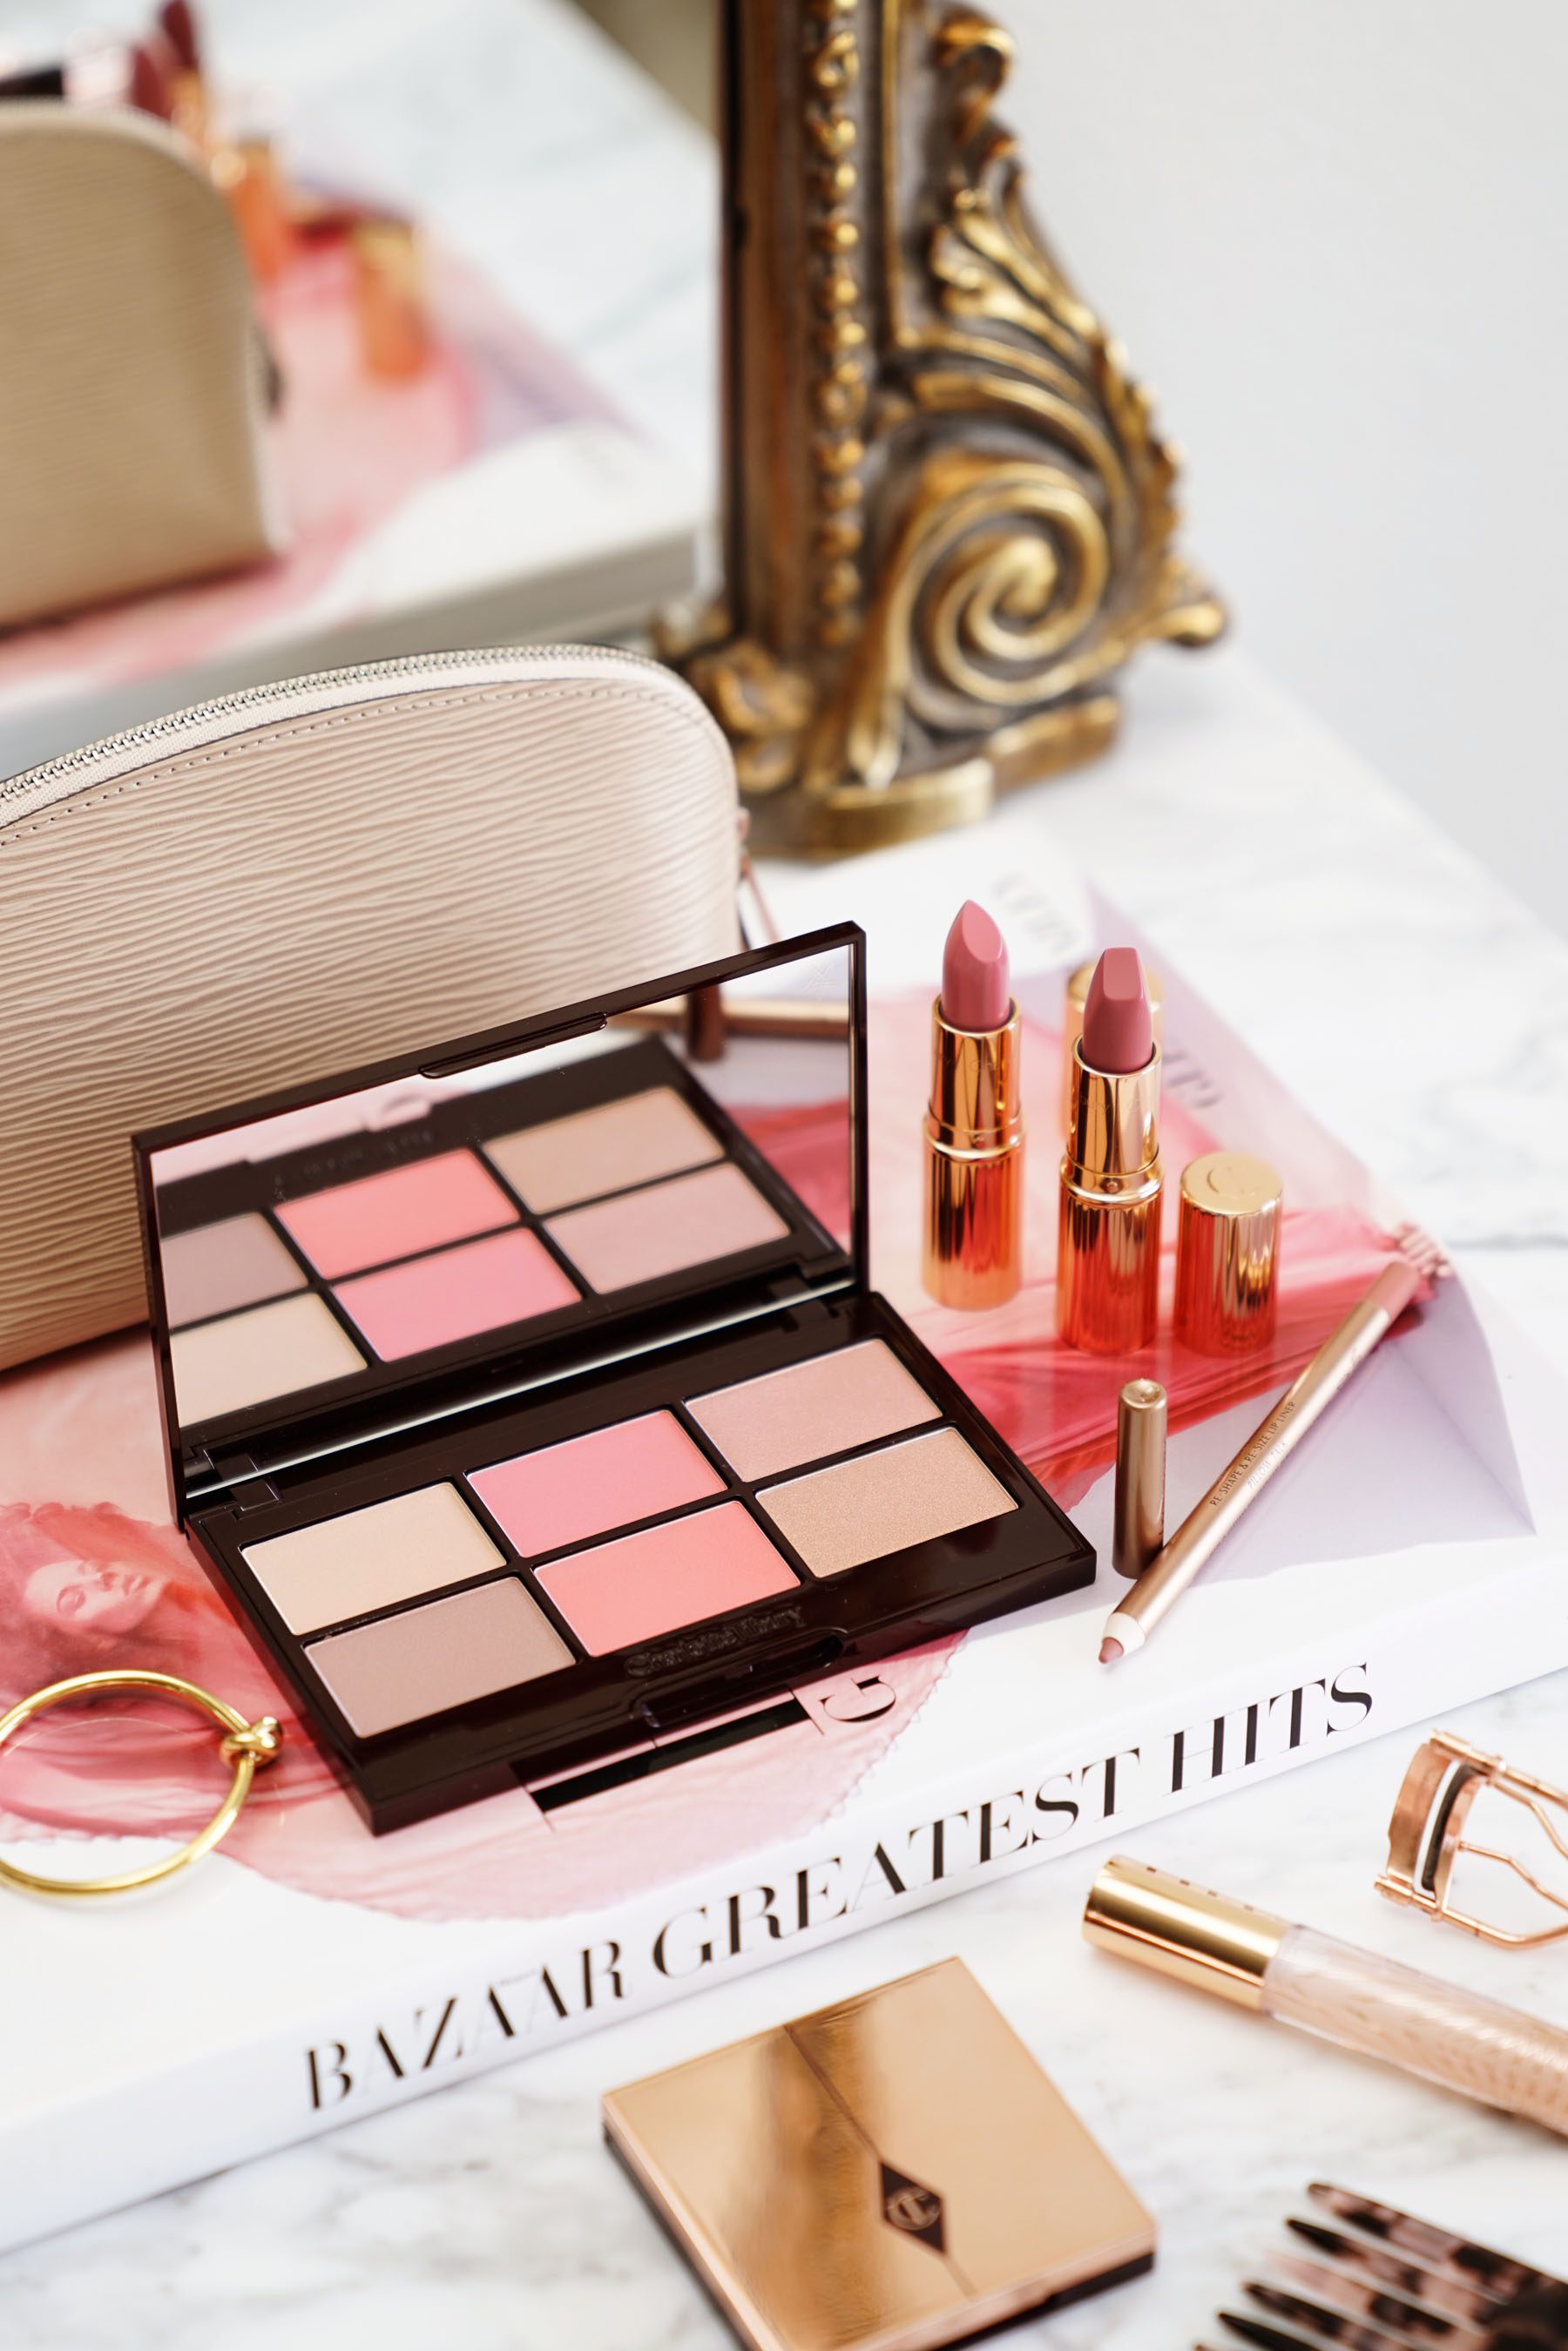 Charlotte Tilbury Glowing Pretty Skin Palette + Pretty Pink Lipstick Set  Review - The Beauty Look Book